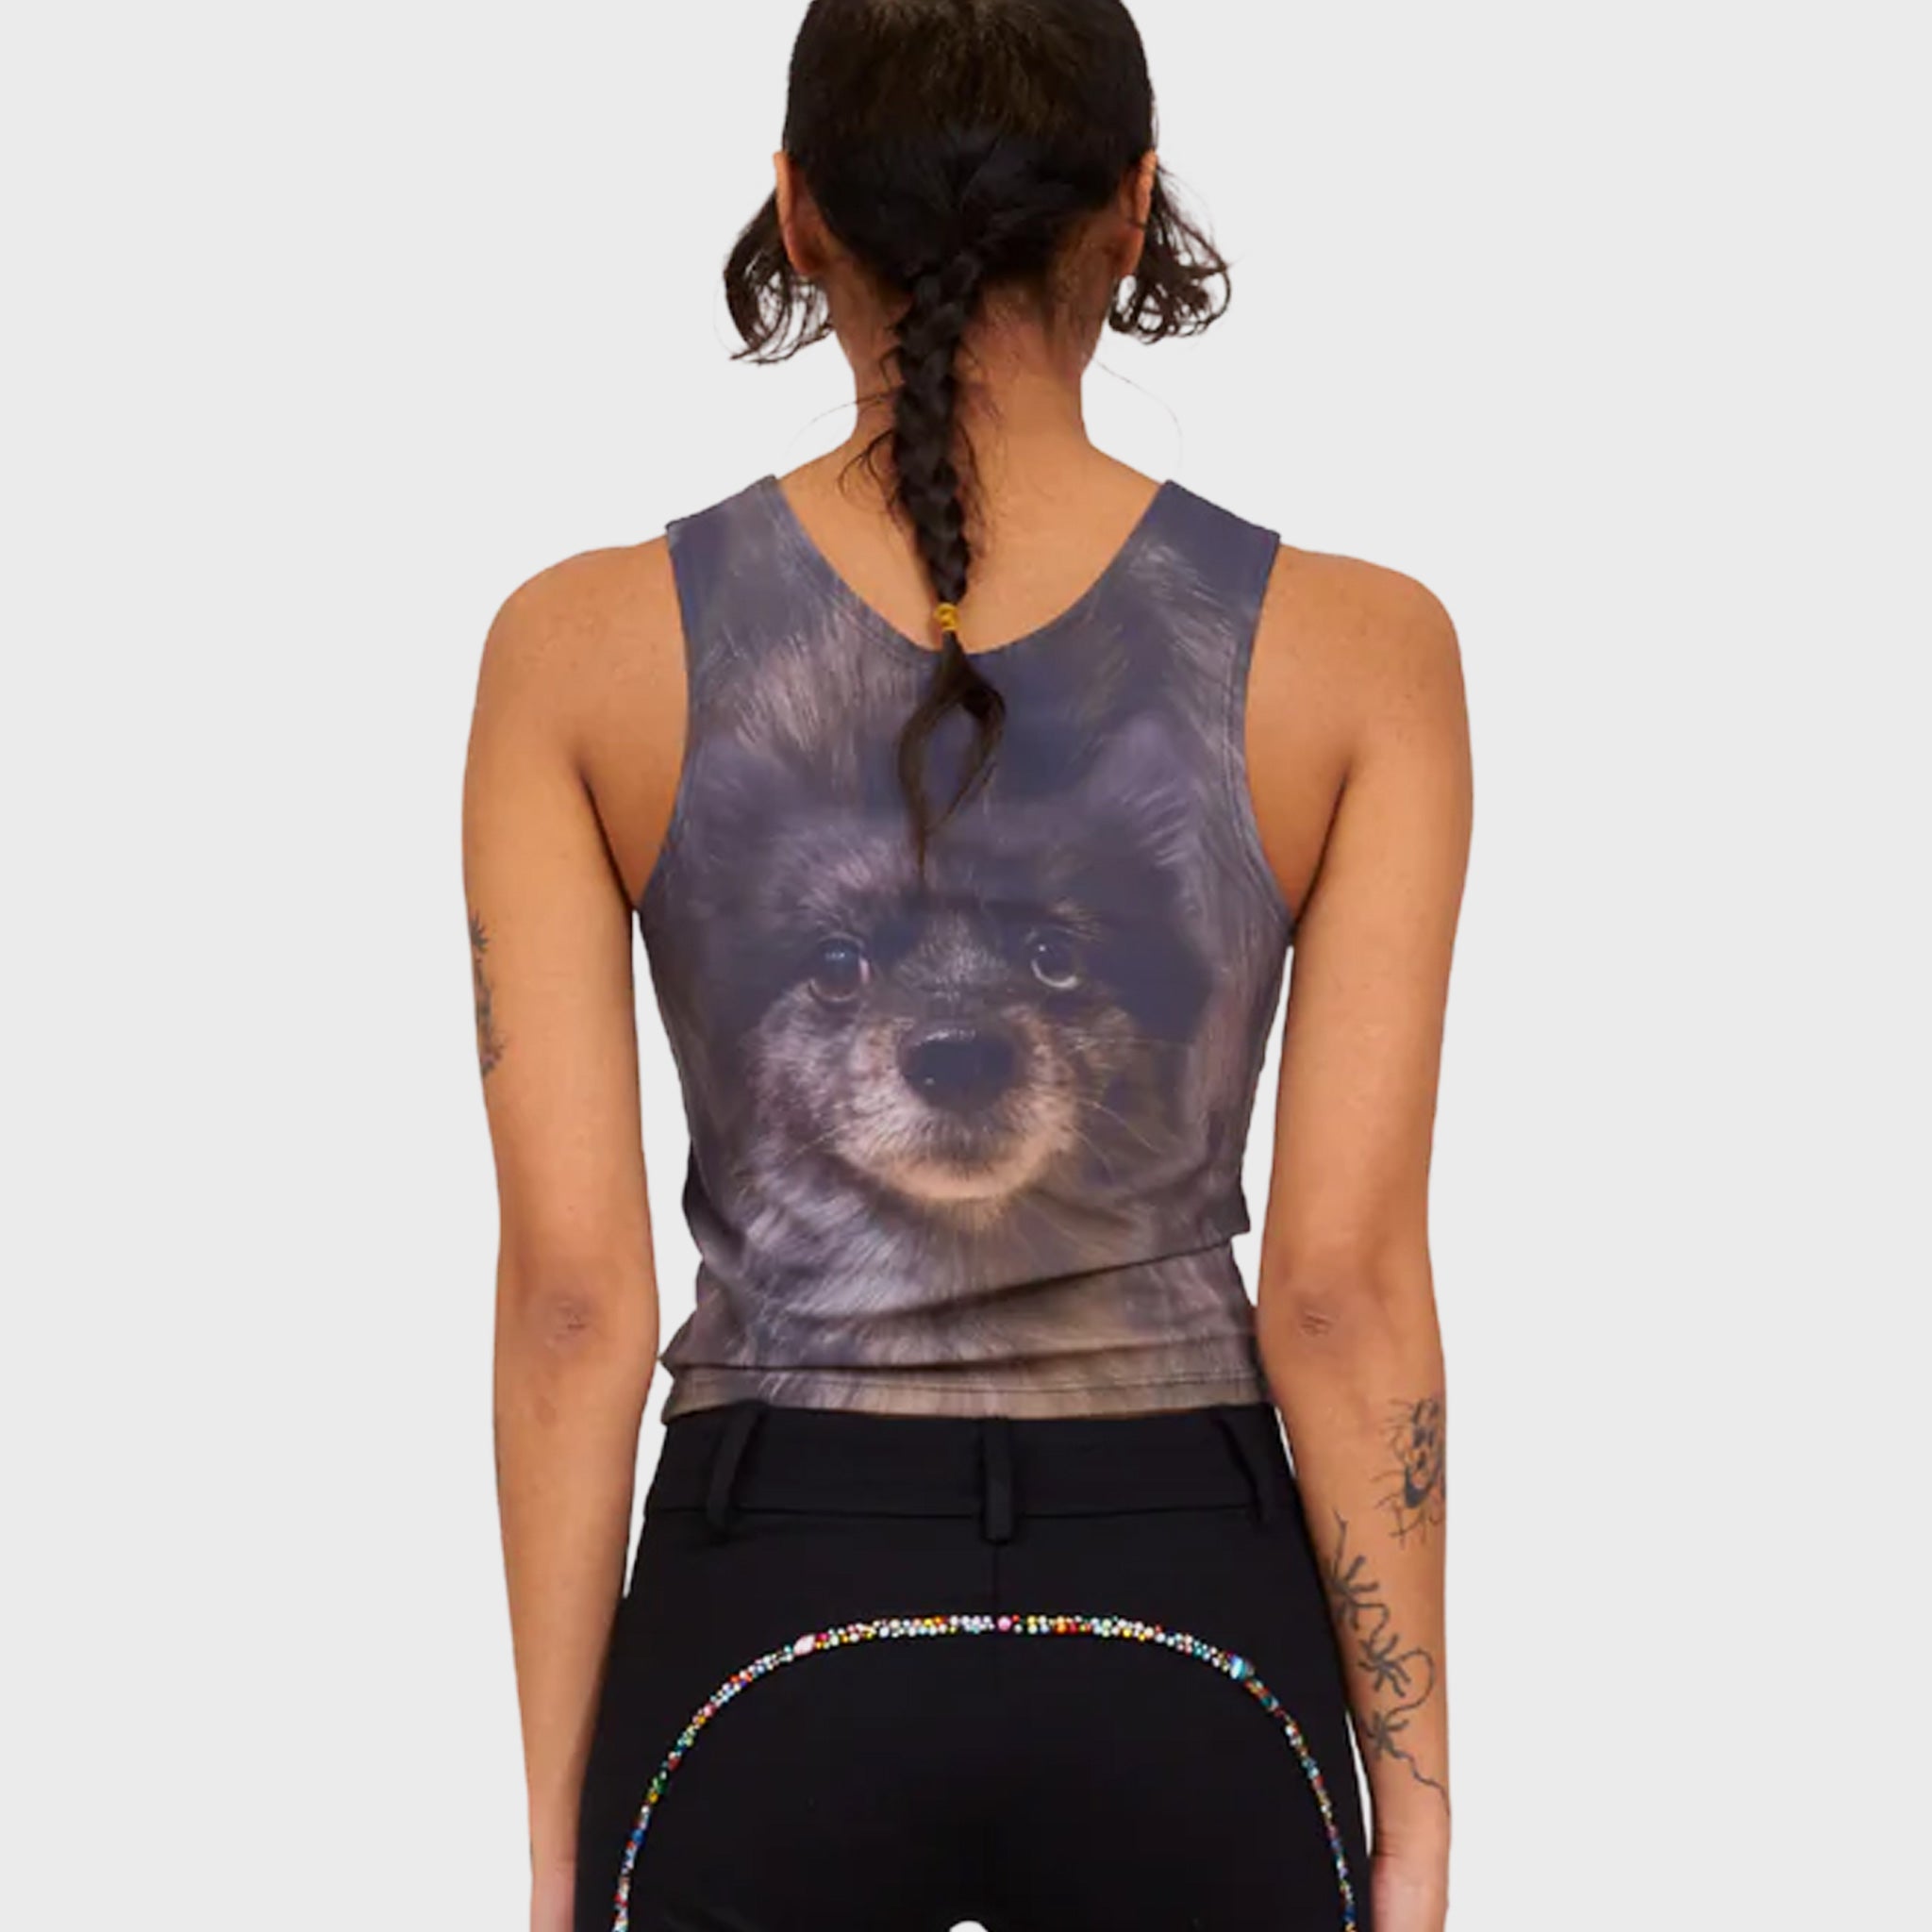 A model wears a fitted tank top printed with the face of a cute black dog - back view.